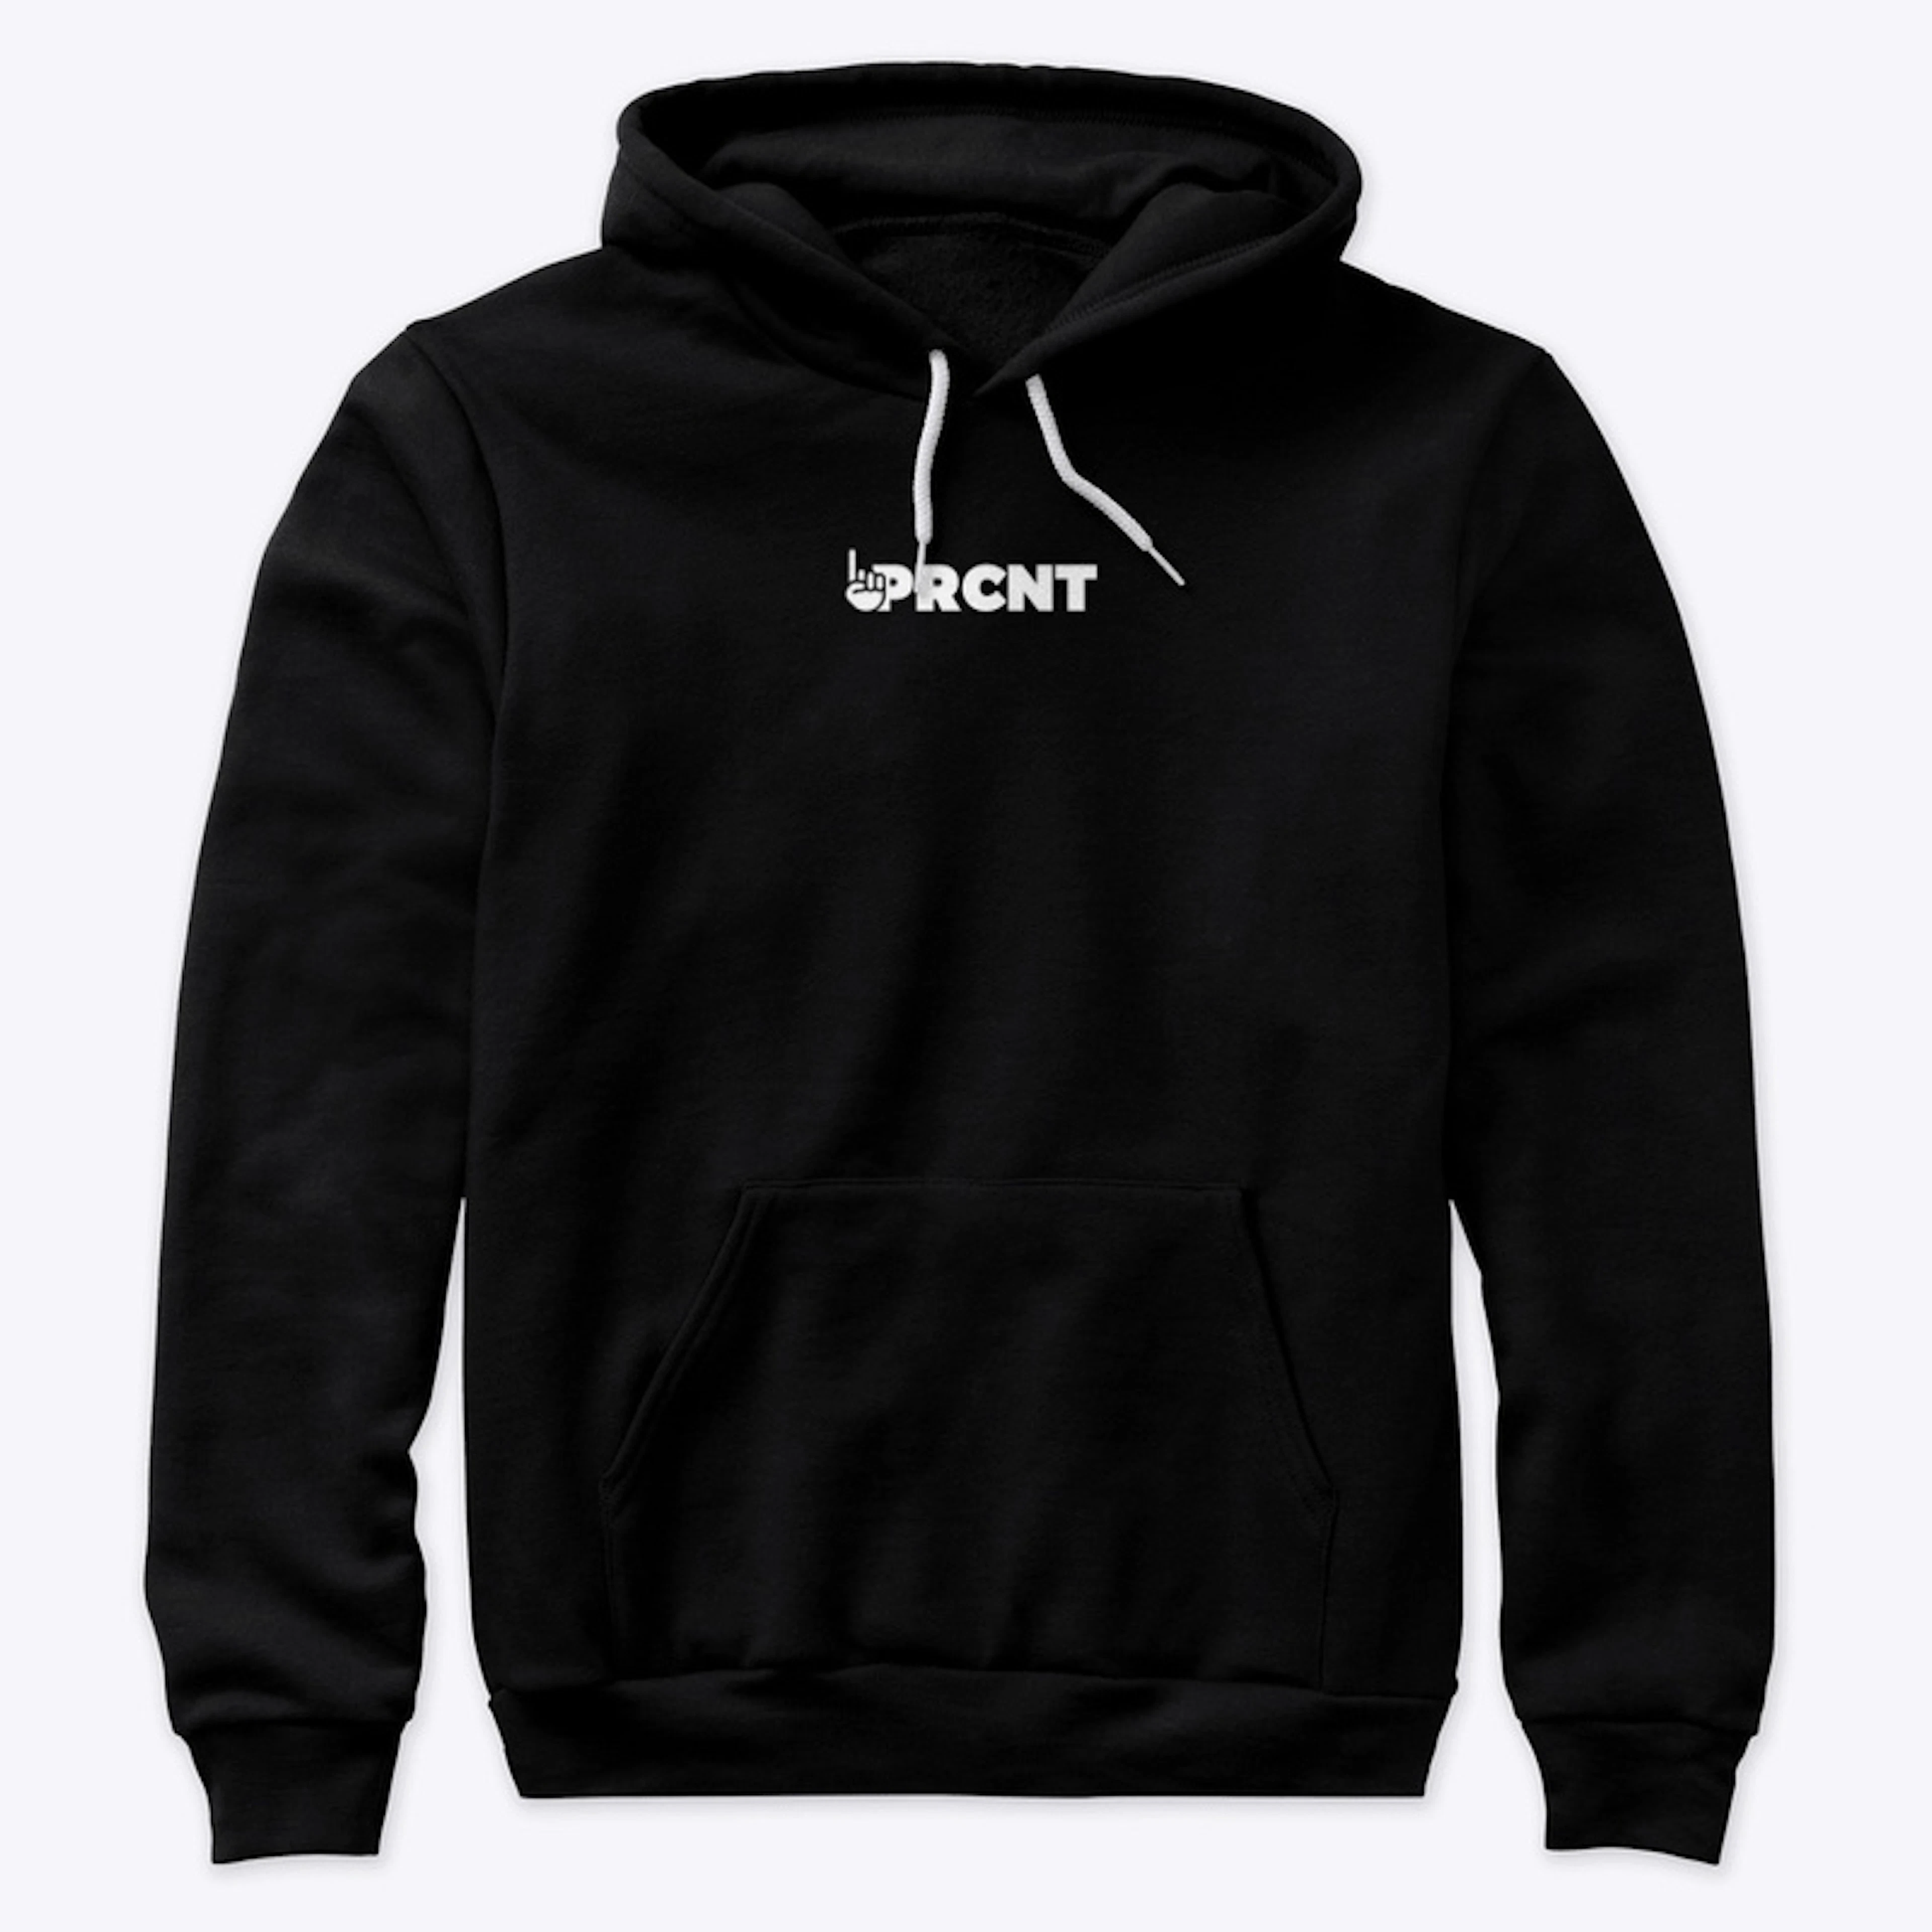 1PRCNT Collection (Black)